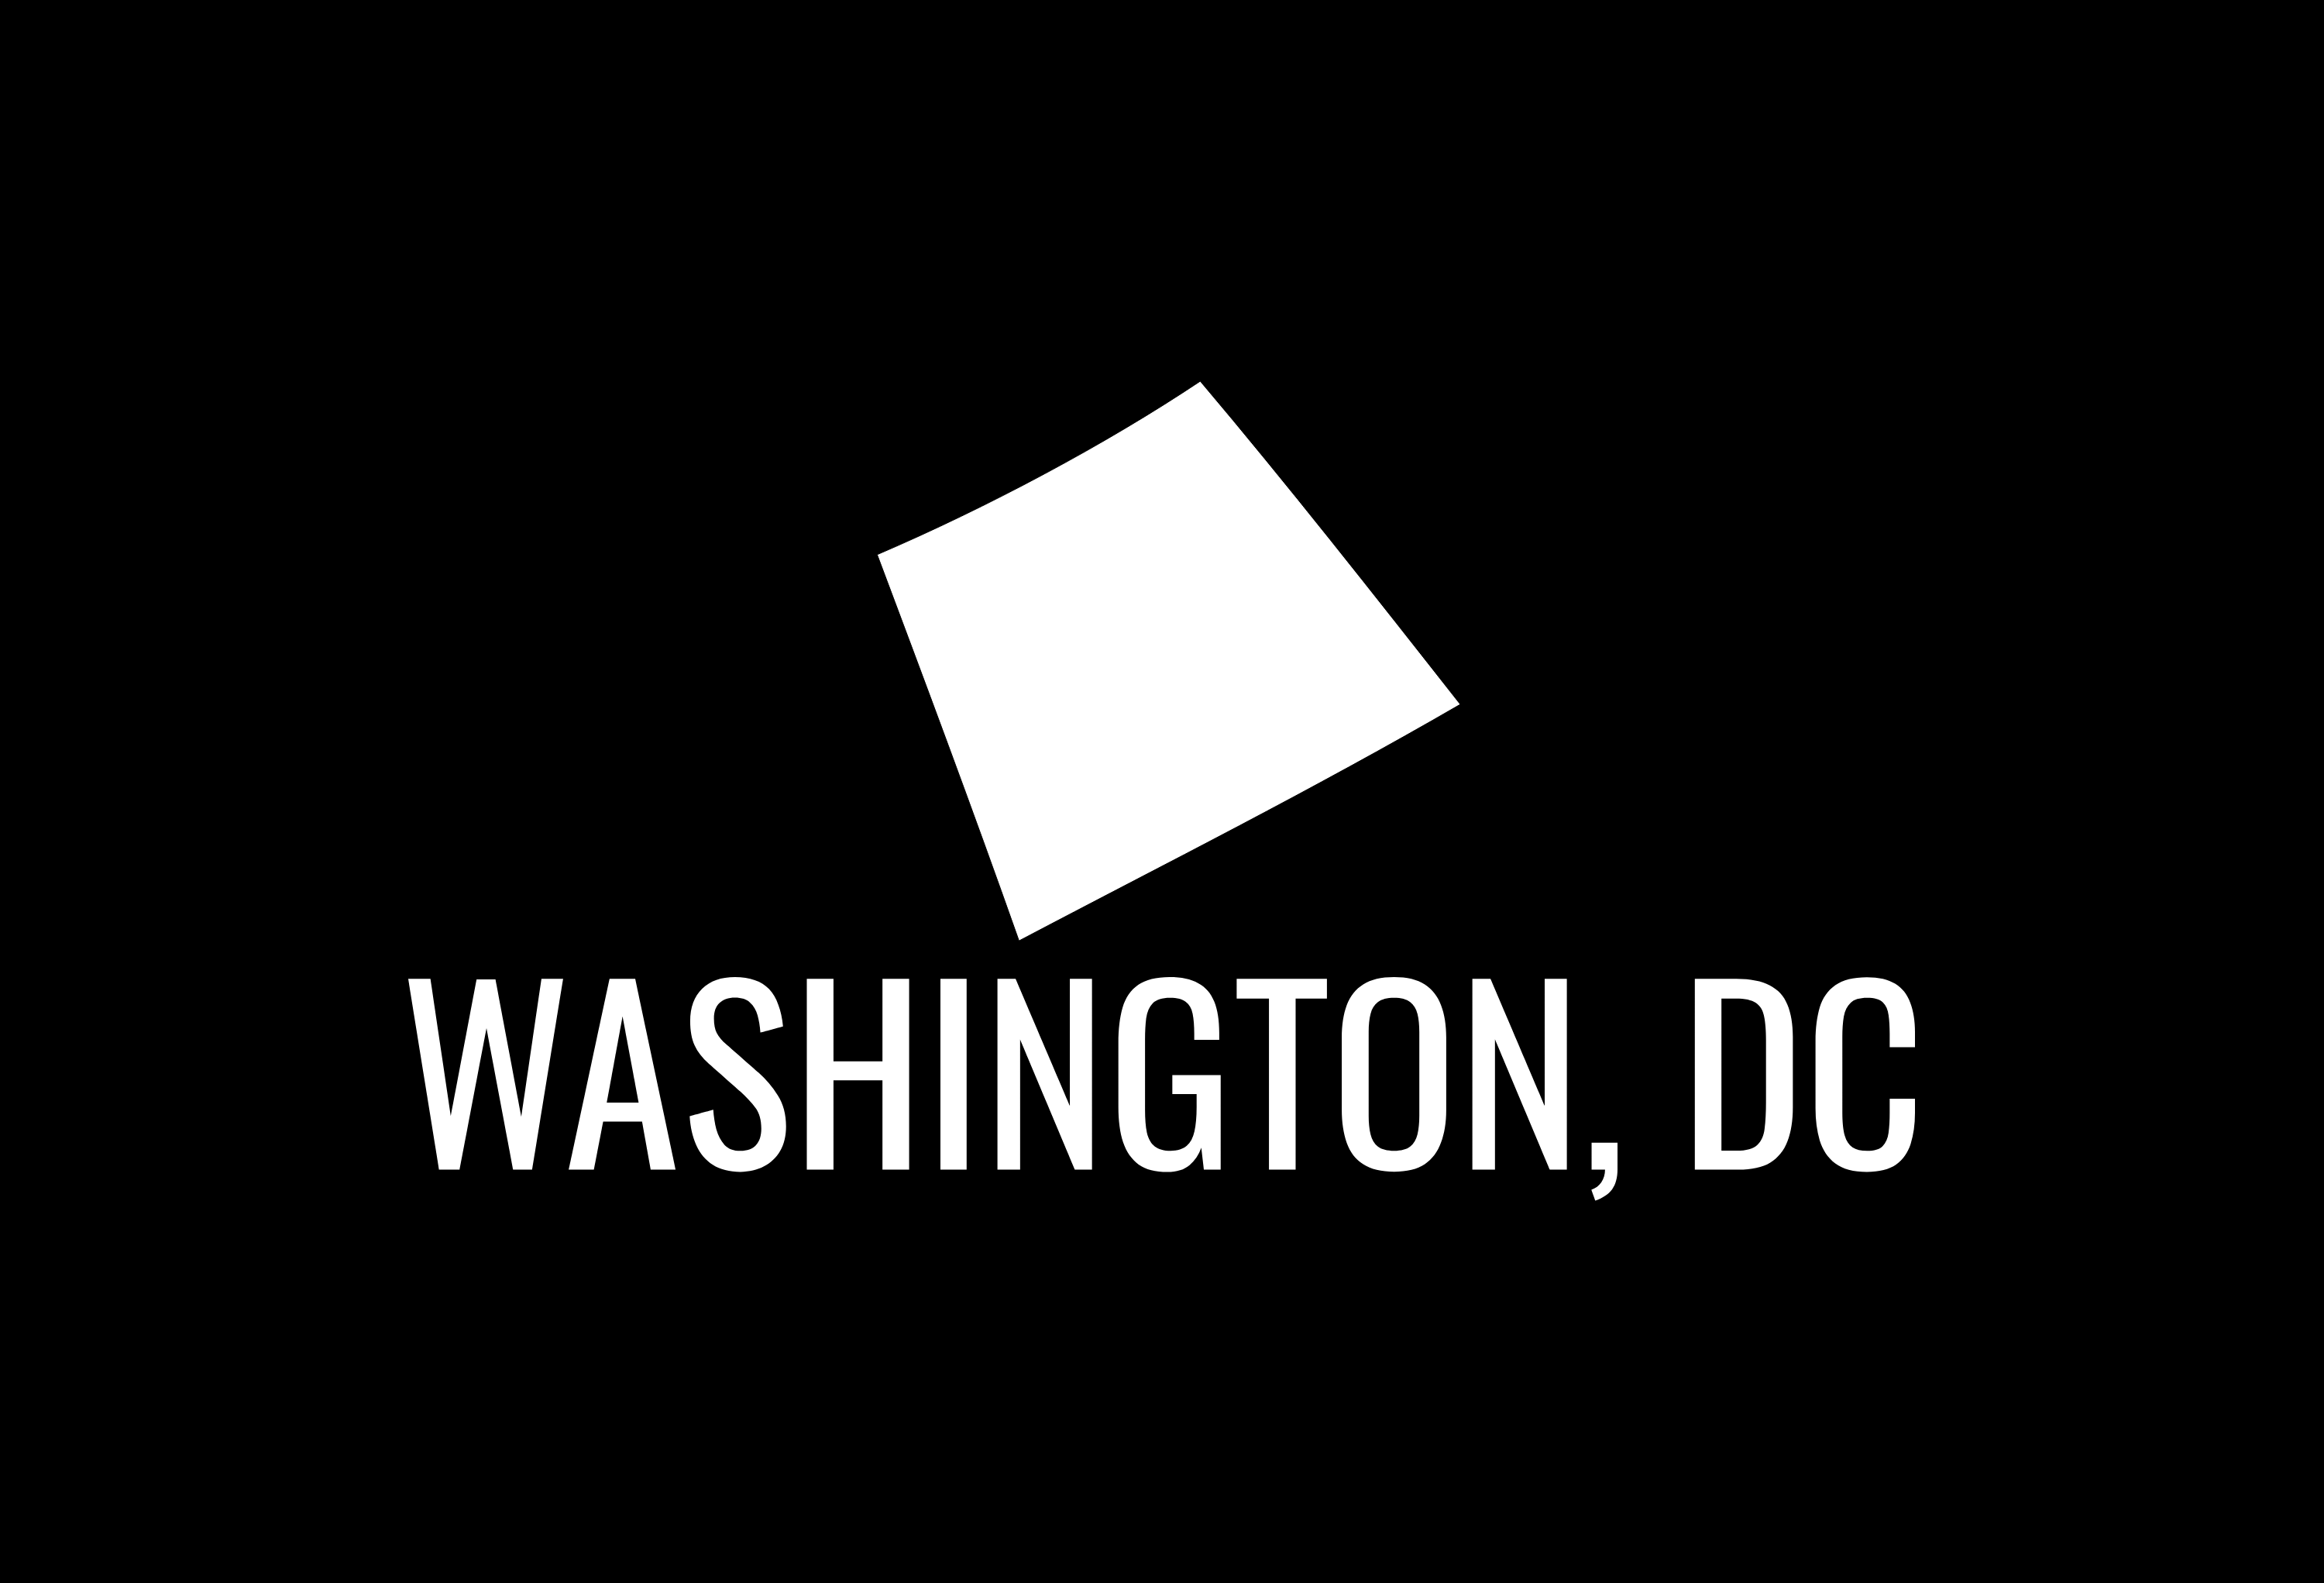 Washington D.C. State Map Car Decal - Permanent Vinyl Sticker for Cars, Vehicle, Doors, Windows, Laptop, and more!